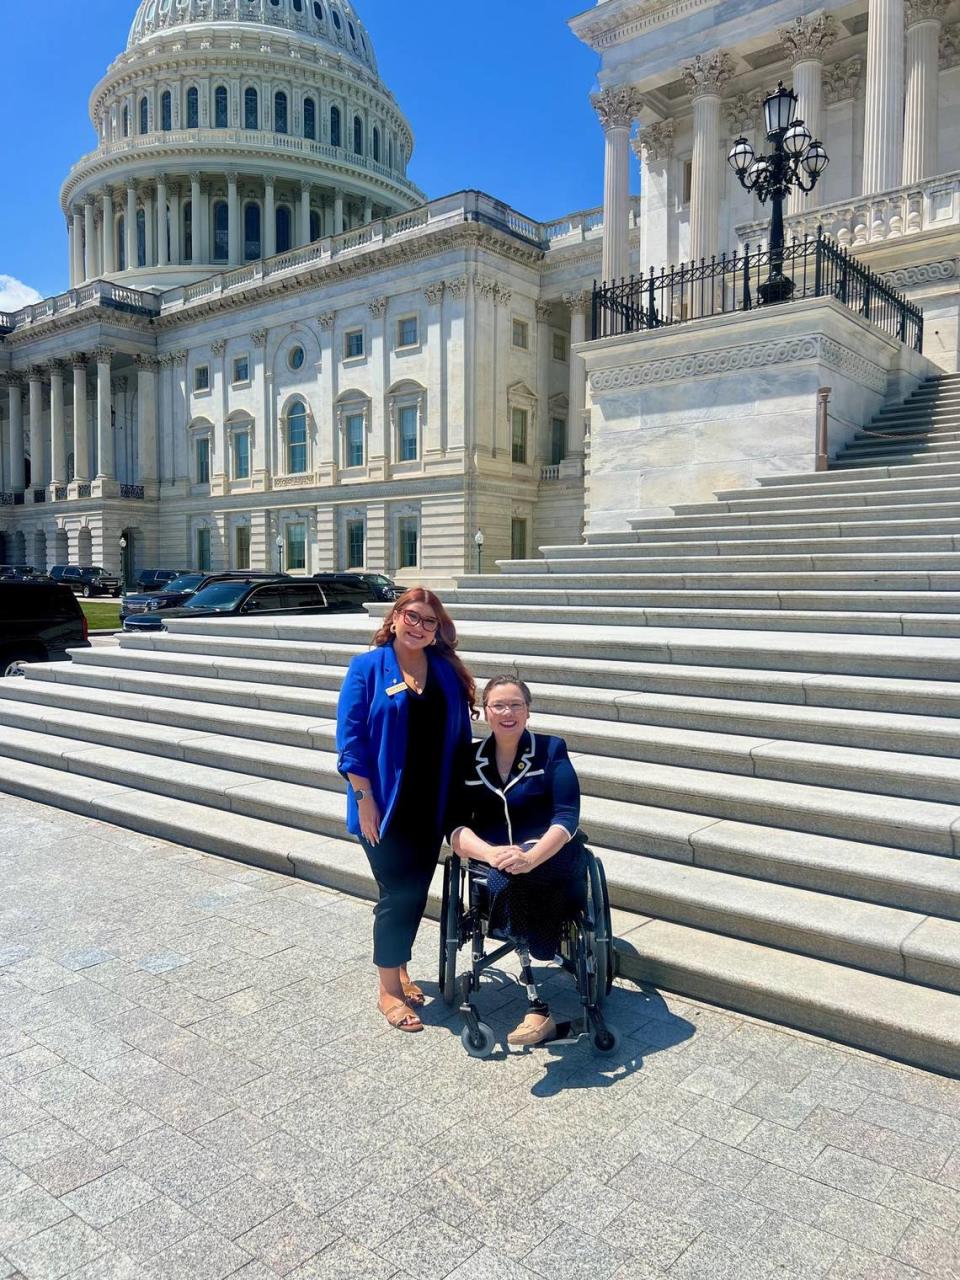 Briana Morales, the 2023 Illinois Teacher of the Year from East St. Louis School District 189, poses alongside U.S. Sen. Tammy Duckworth on the stairs of the Capitol in Washington, D.C.